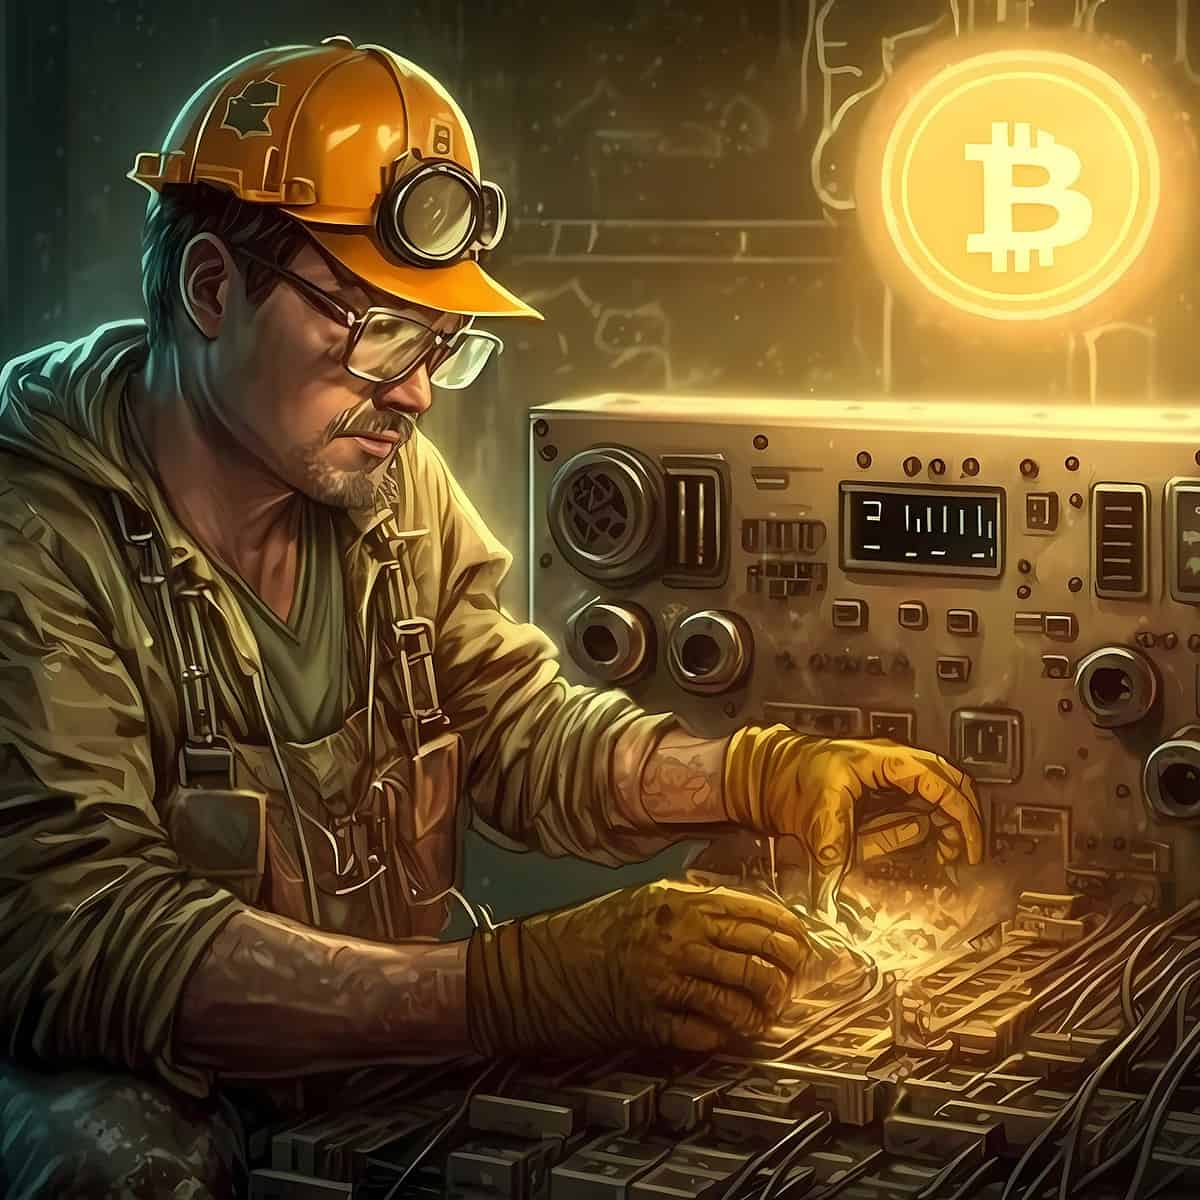 Bitcoin Miner's Exchange Flow Reach Over 1B BTC, Experts See No Sell-Offs